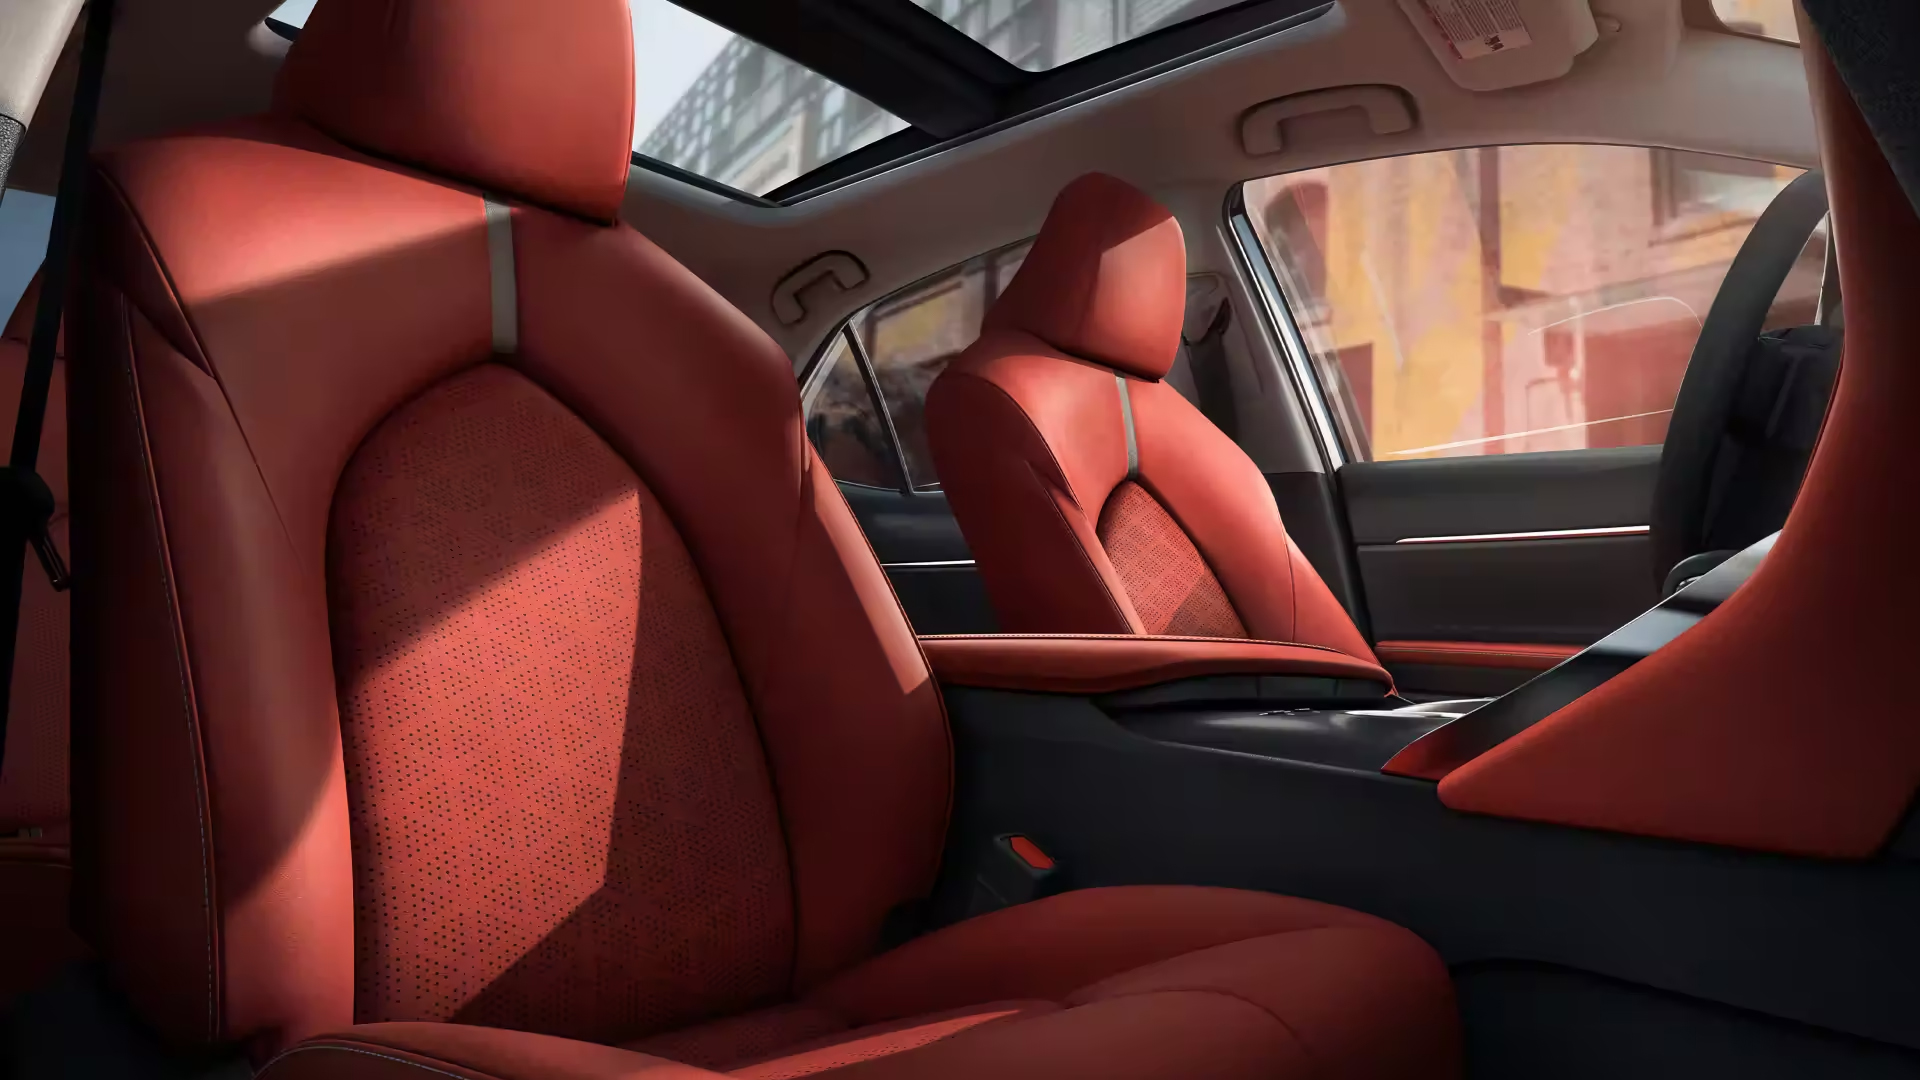 Is leather or synthetic leather upholstery better in cars?